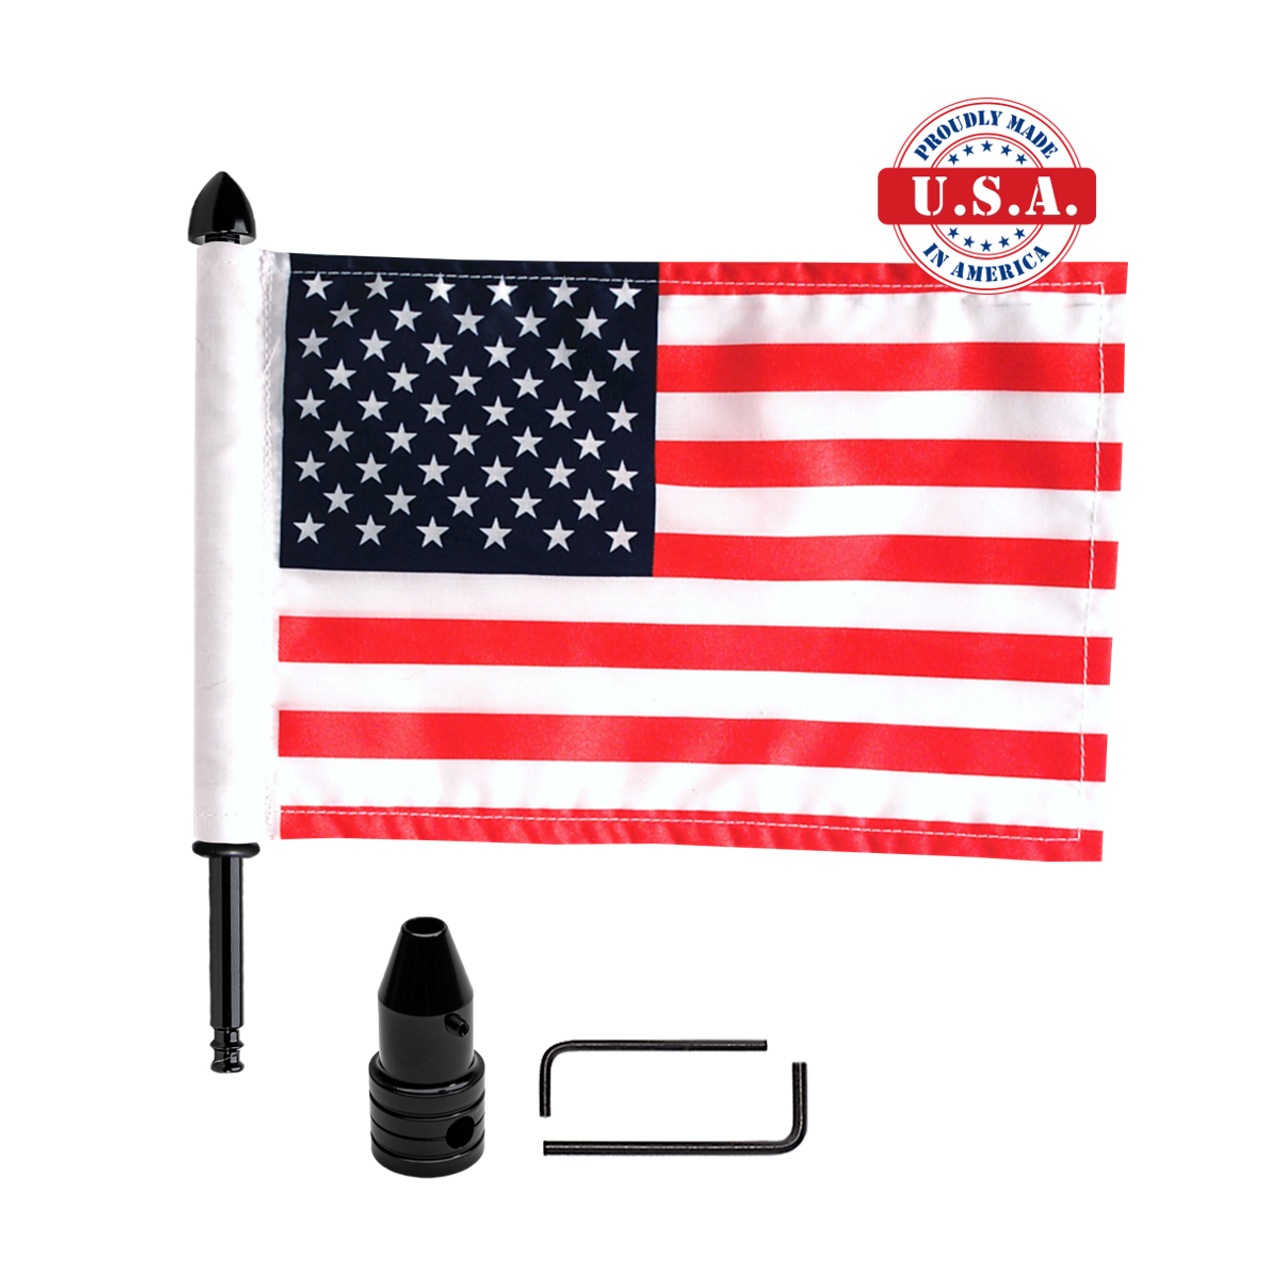 Fixed, upright flag mount with 9" pole, standard cone topper & 6"x9" highway flag